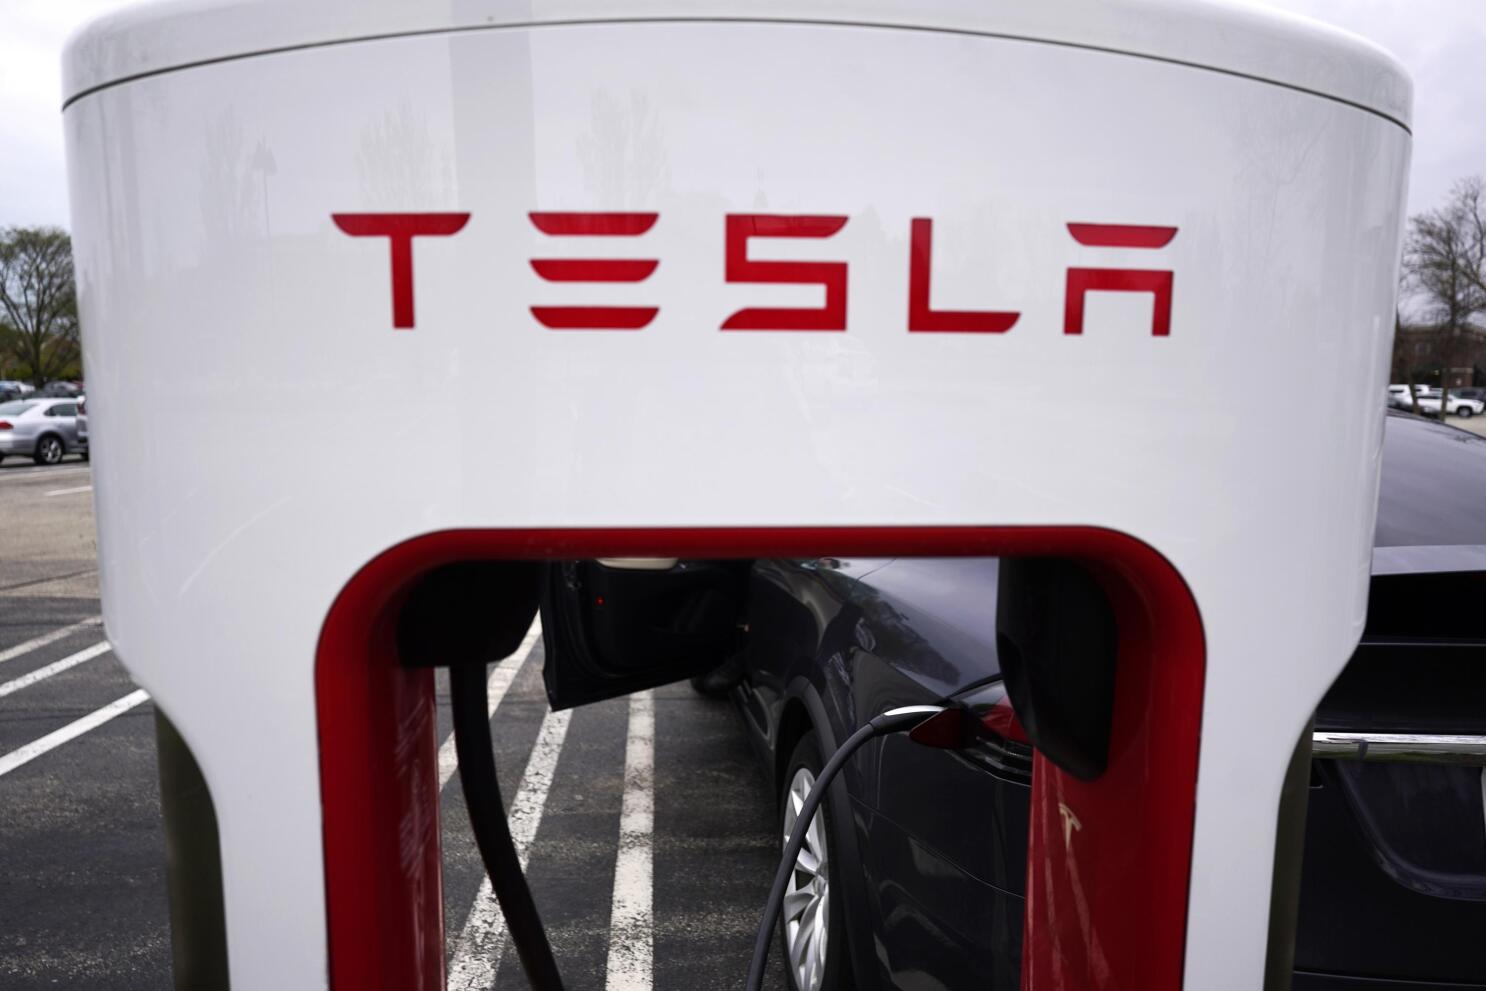 Competitors chip away at Tesla's US electric vehicle share | AP News